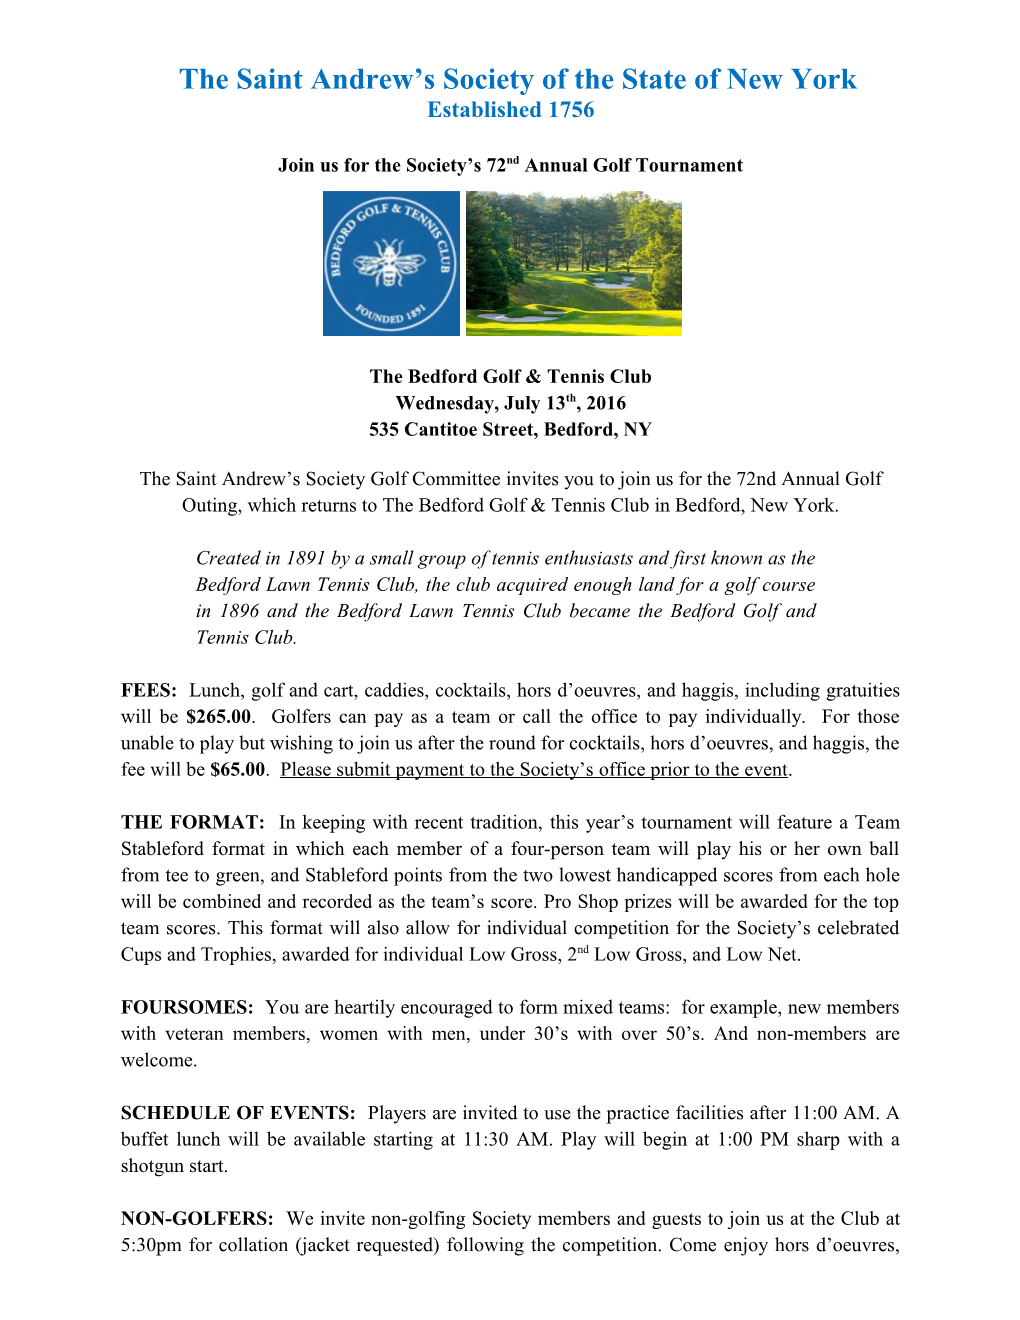 The Saint Andrew S Society of the State of New York